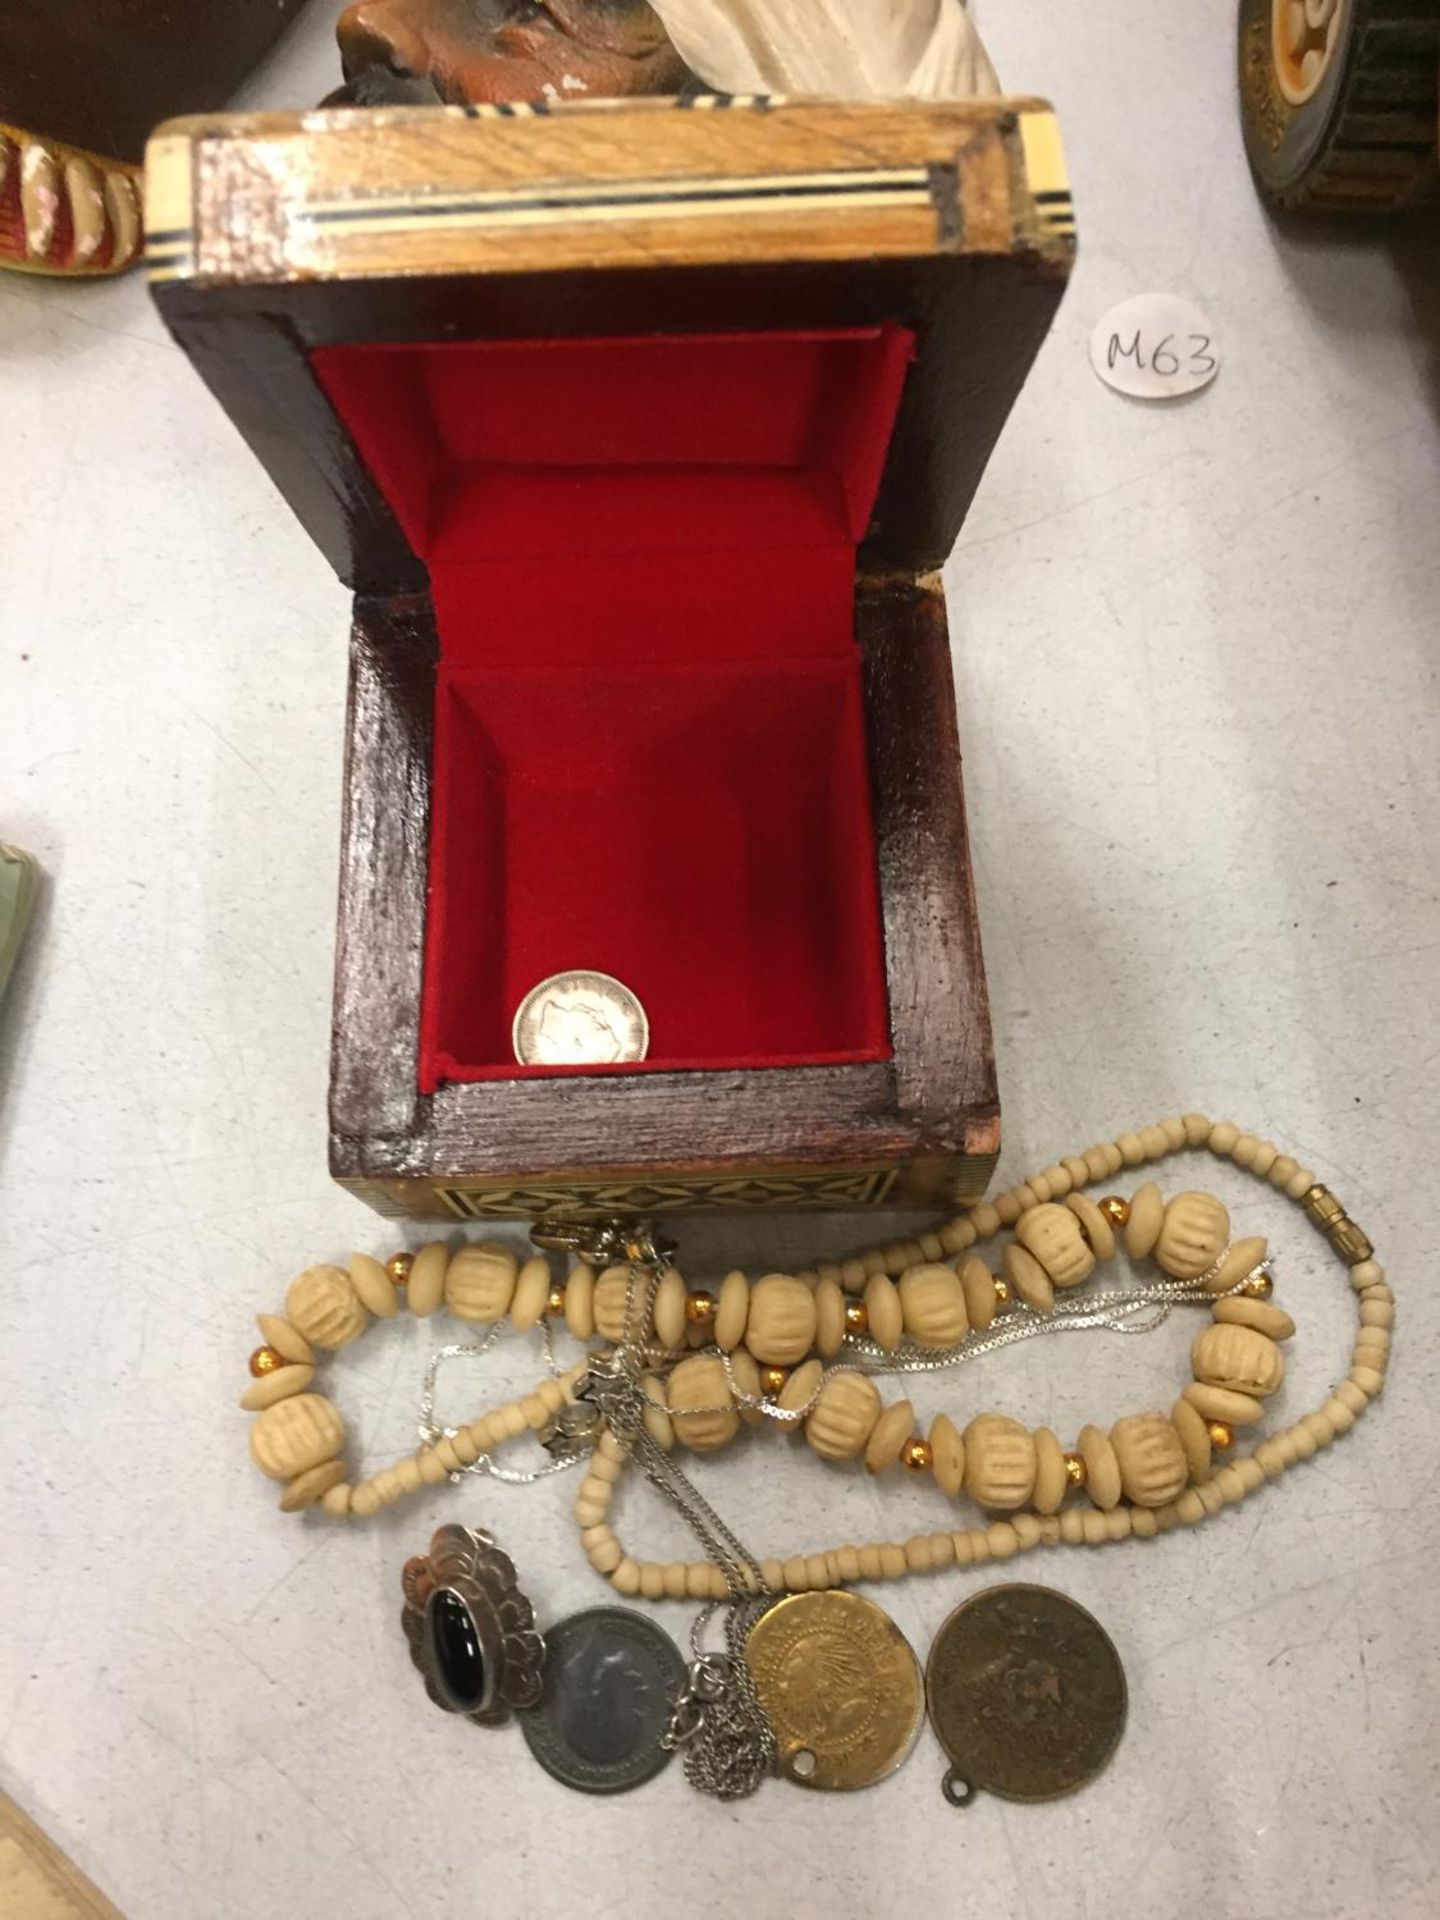 A SMALL DECORATIVE BOX AND CONTENTS CONSISTING OF COINS AND NECKLACES